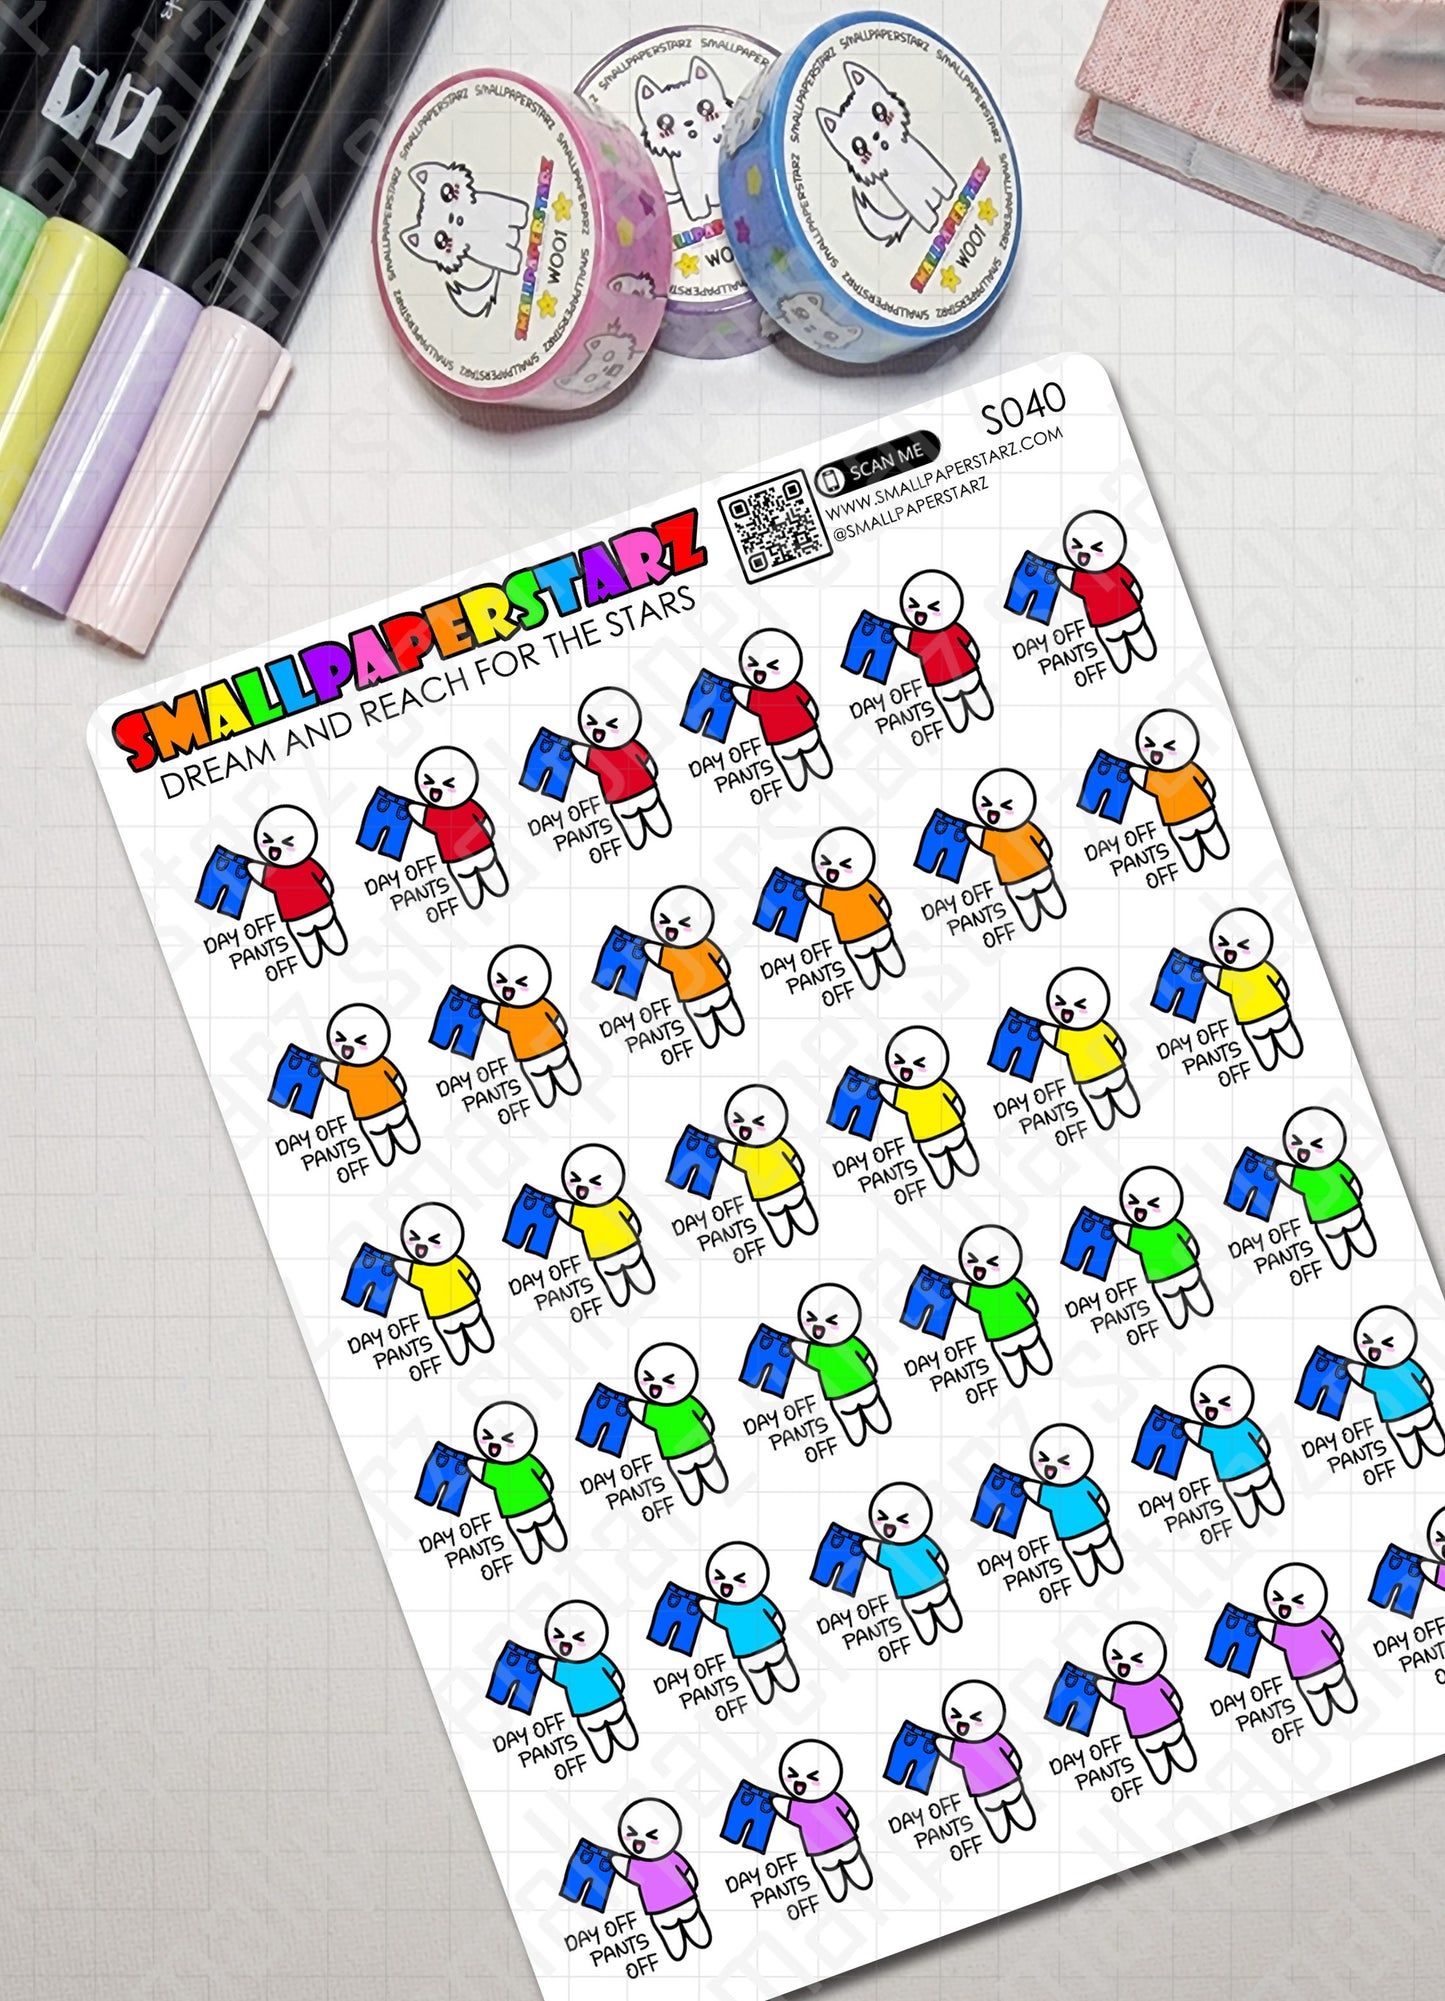 S040 - Day Off, Pants Off! Sticker Sheet